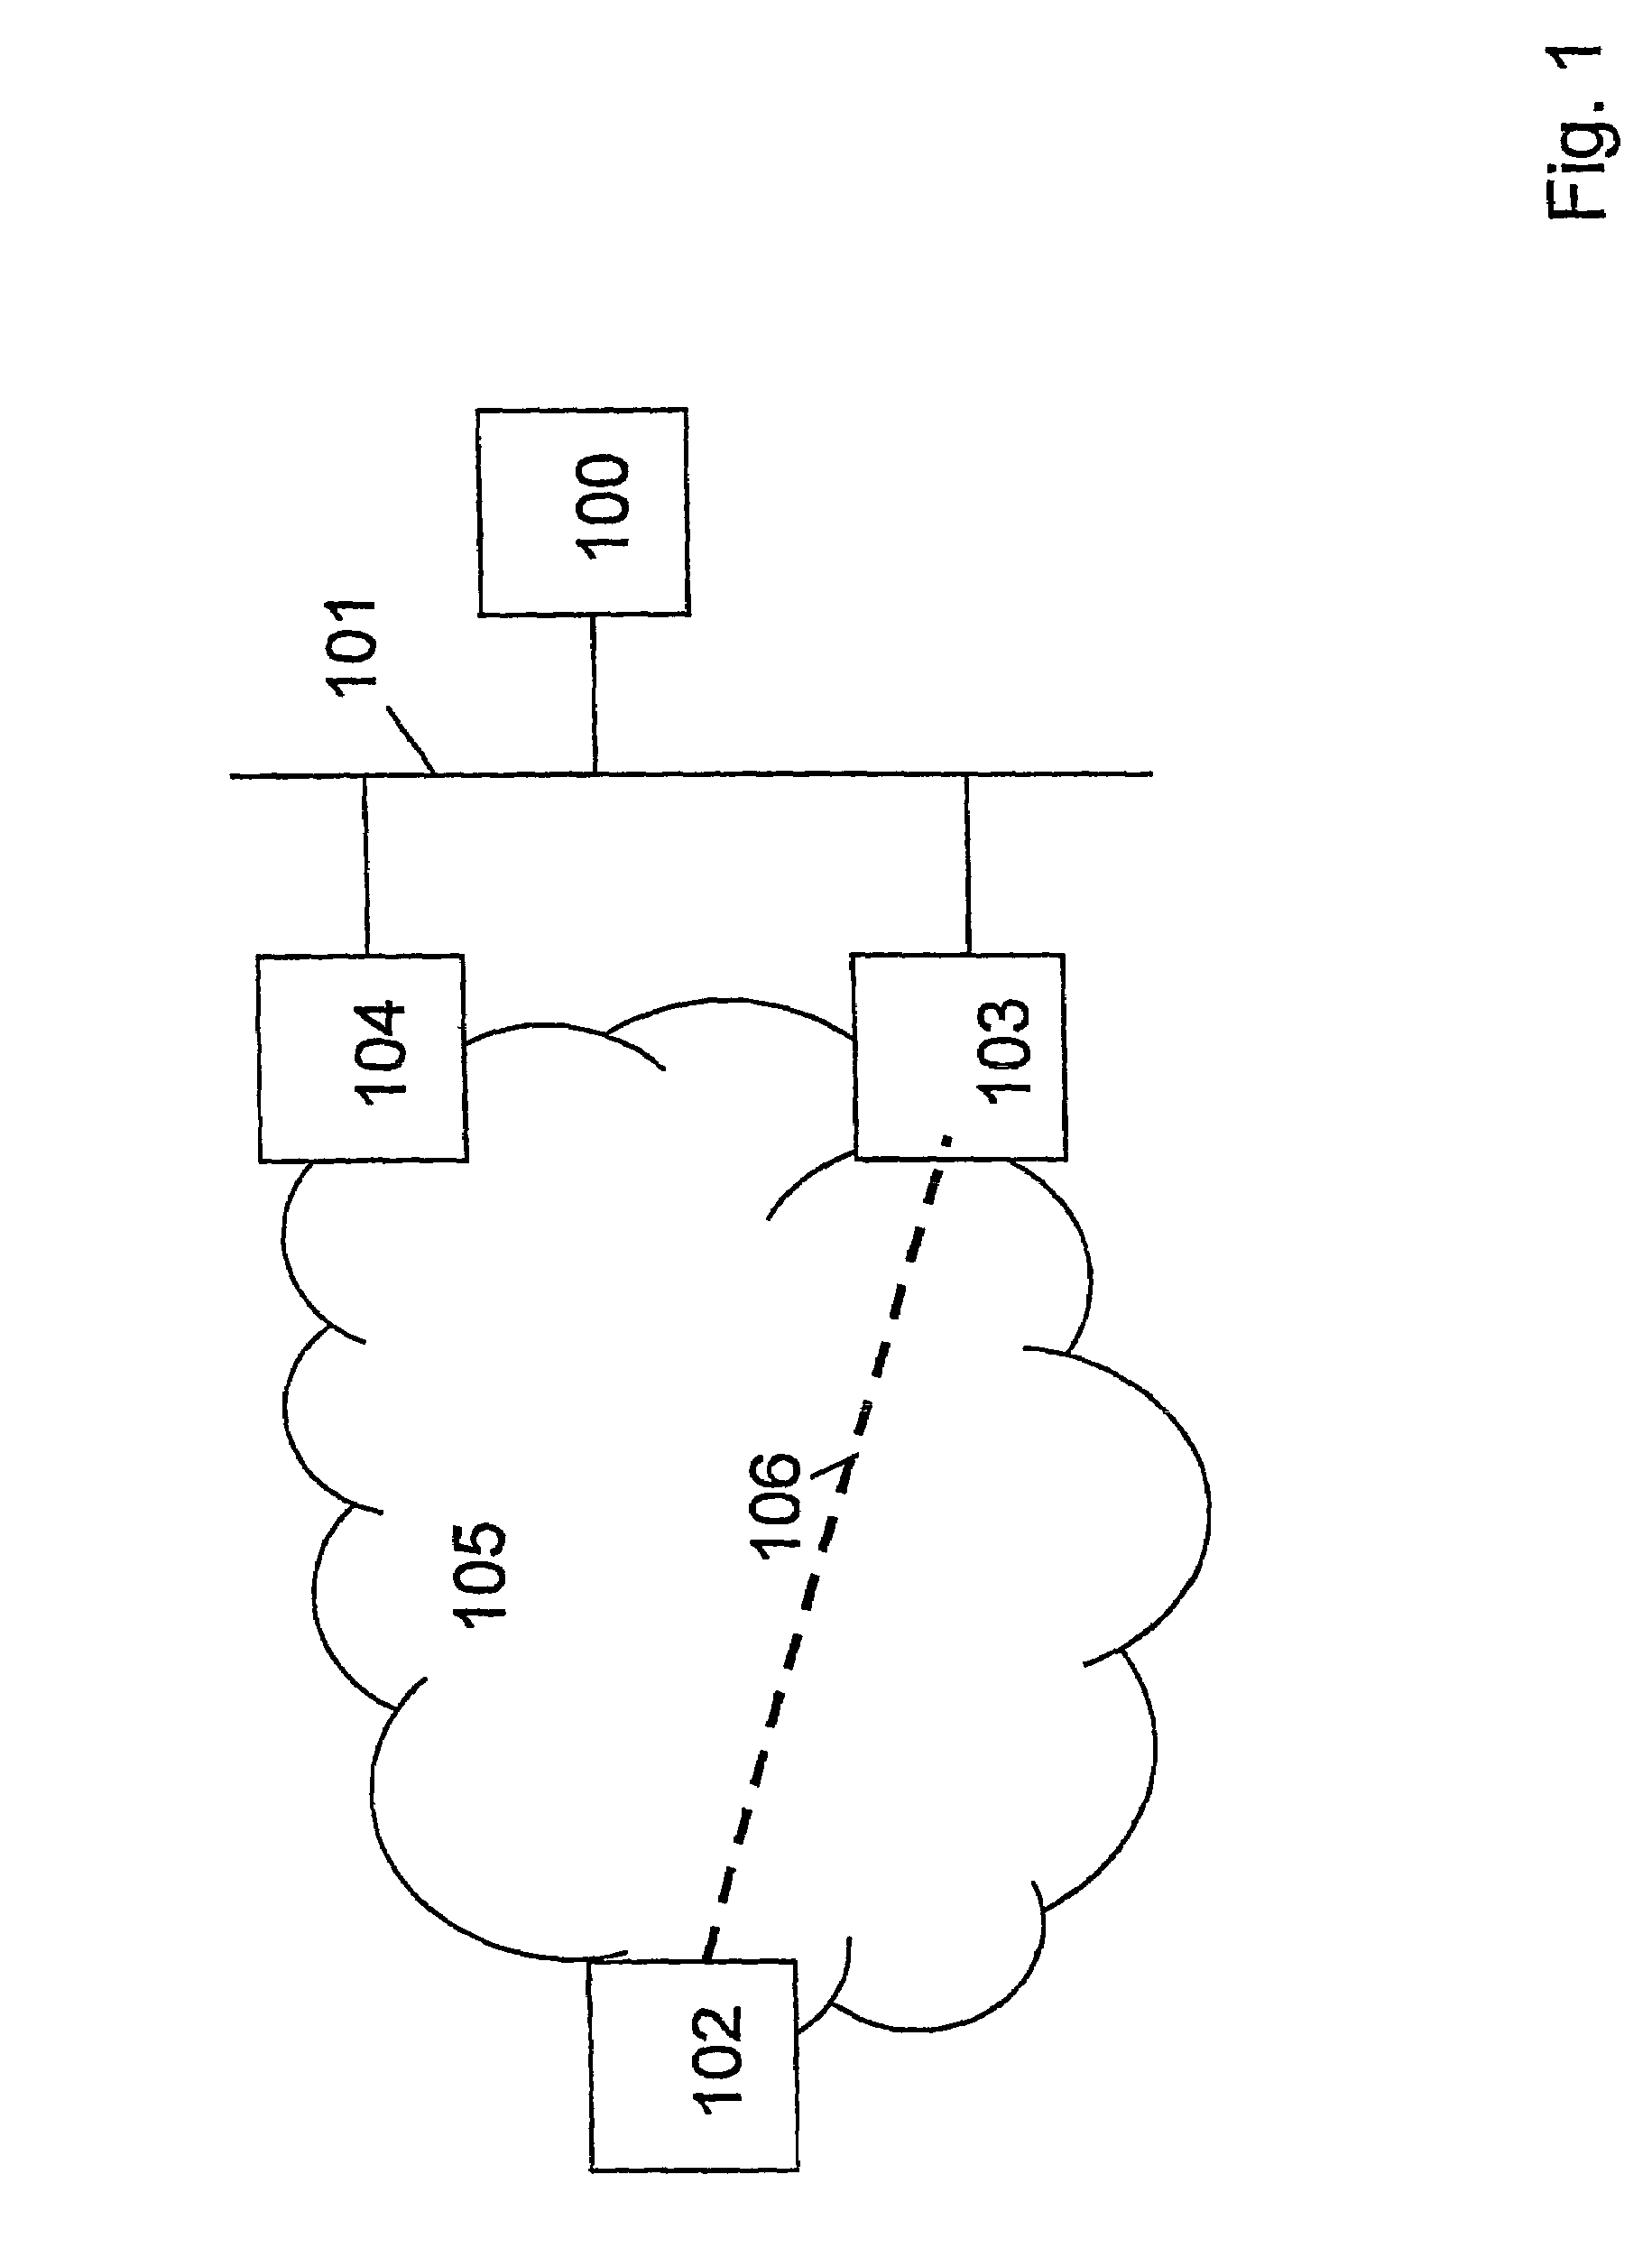 Method and arrangement to secure access to a communications network